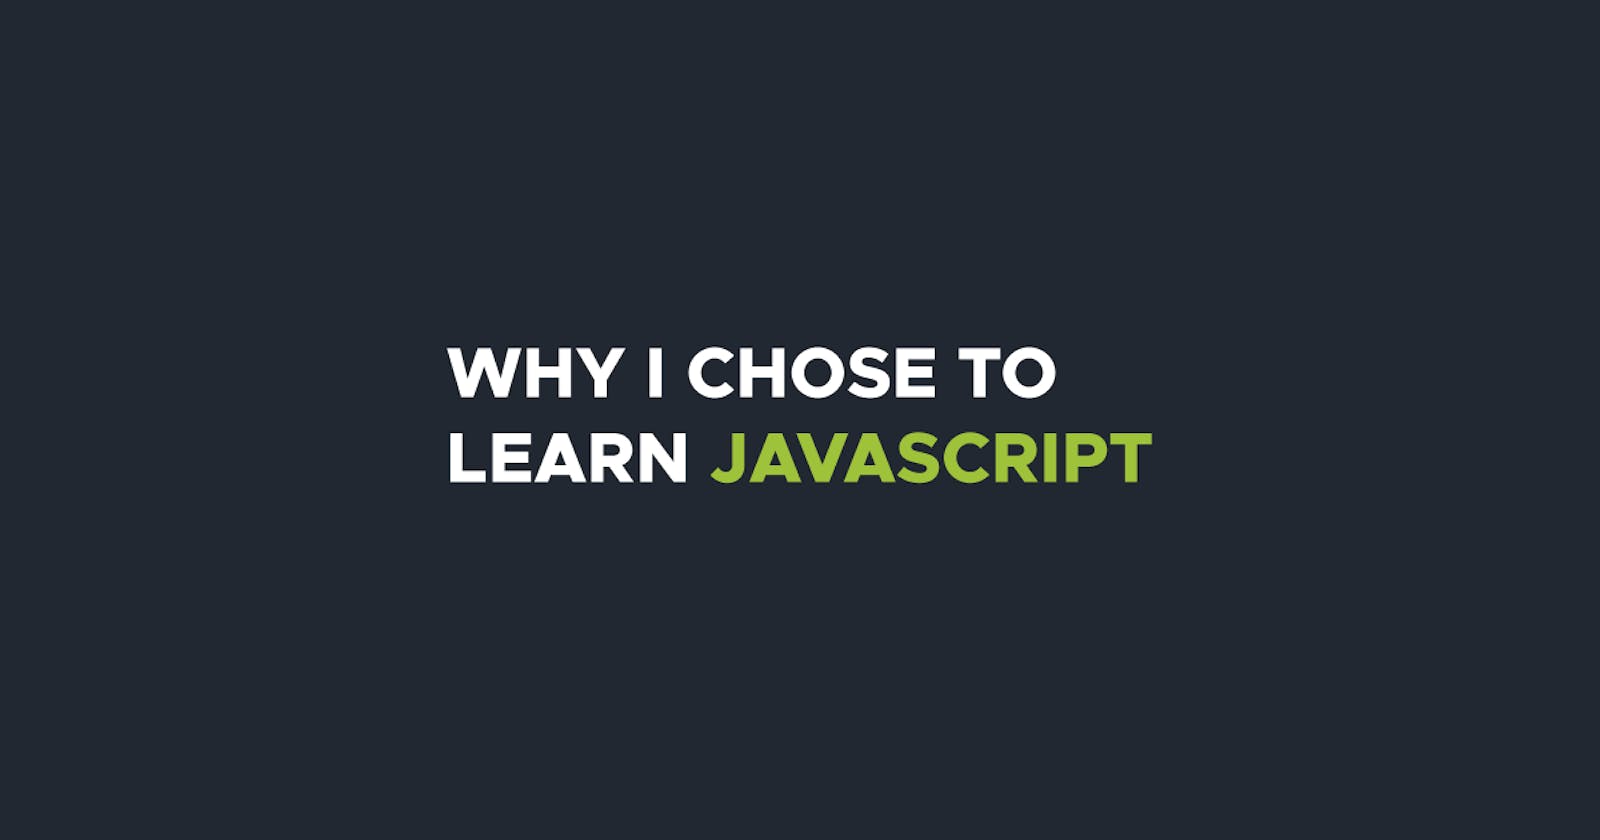 Why I chose to learn JavaScript